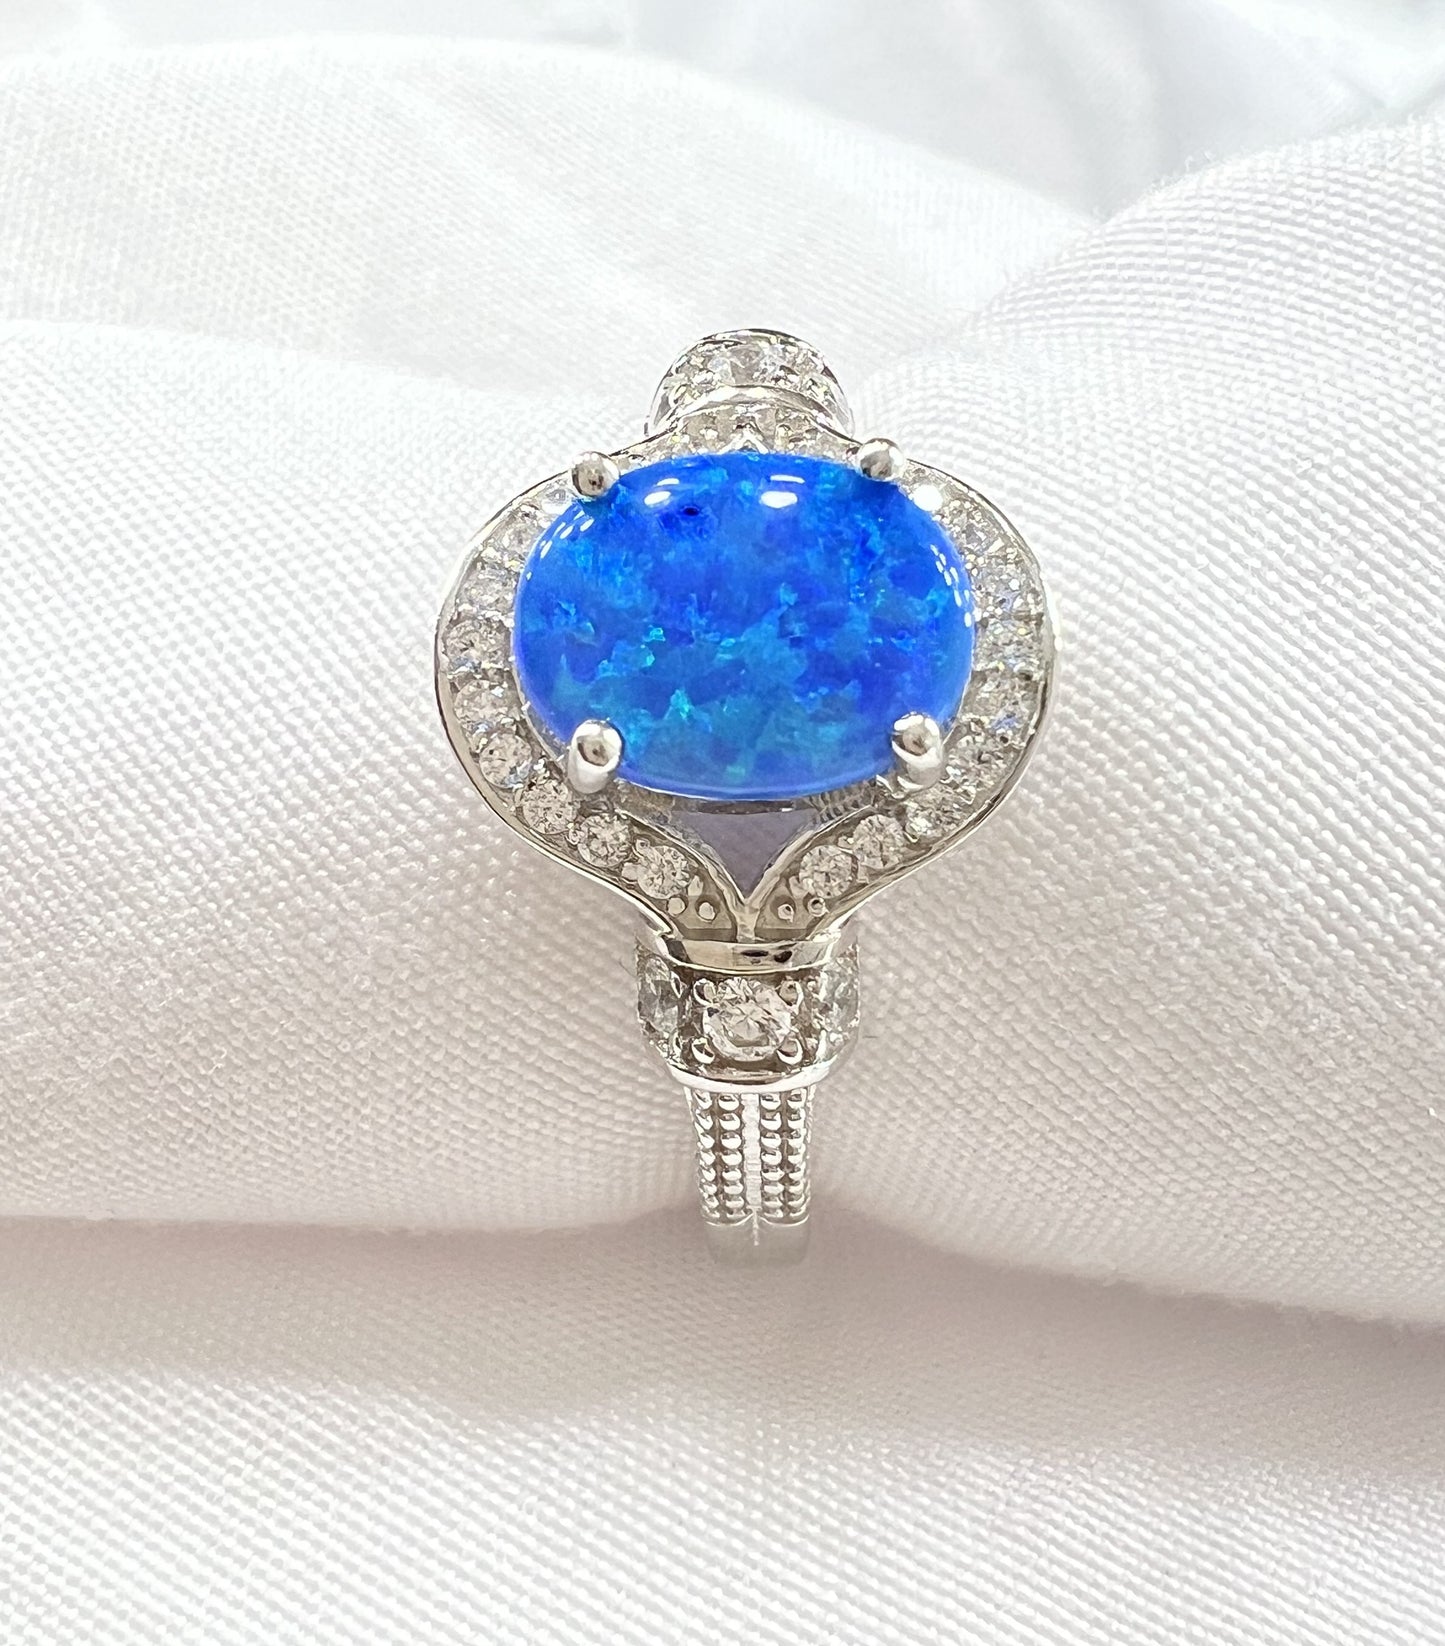 Elegant Blue Fire Oval Opal & Cubic Zirconia Ring Sterling Silver Ring